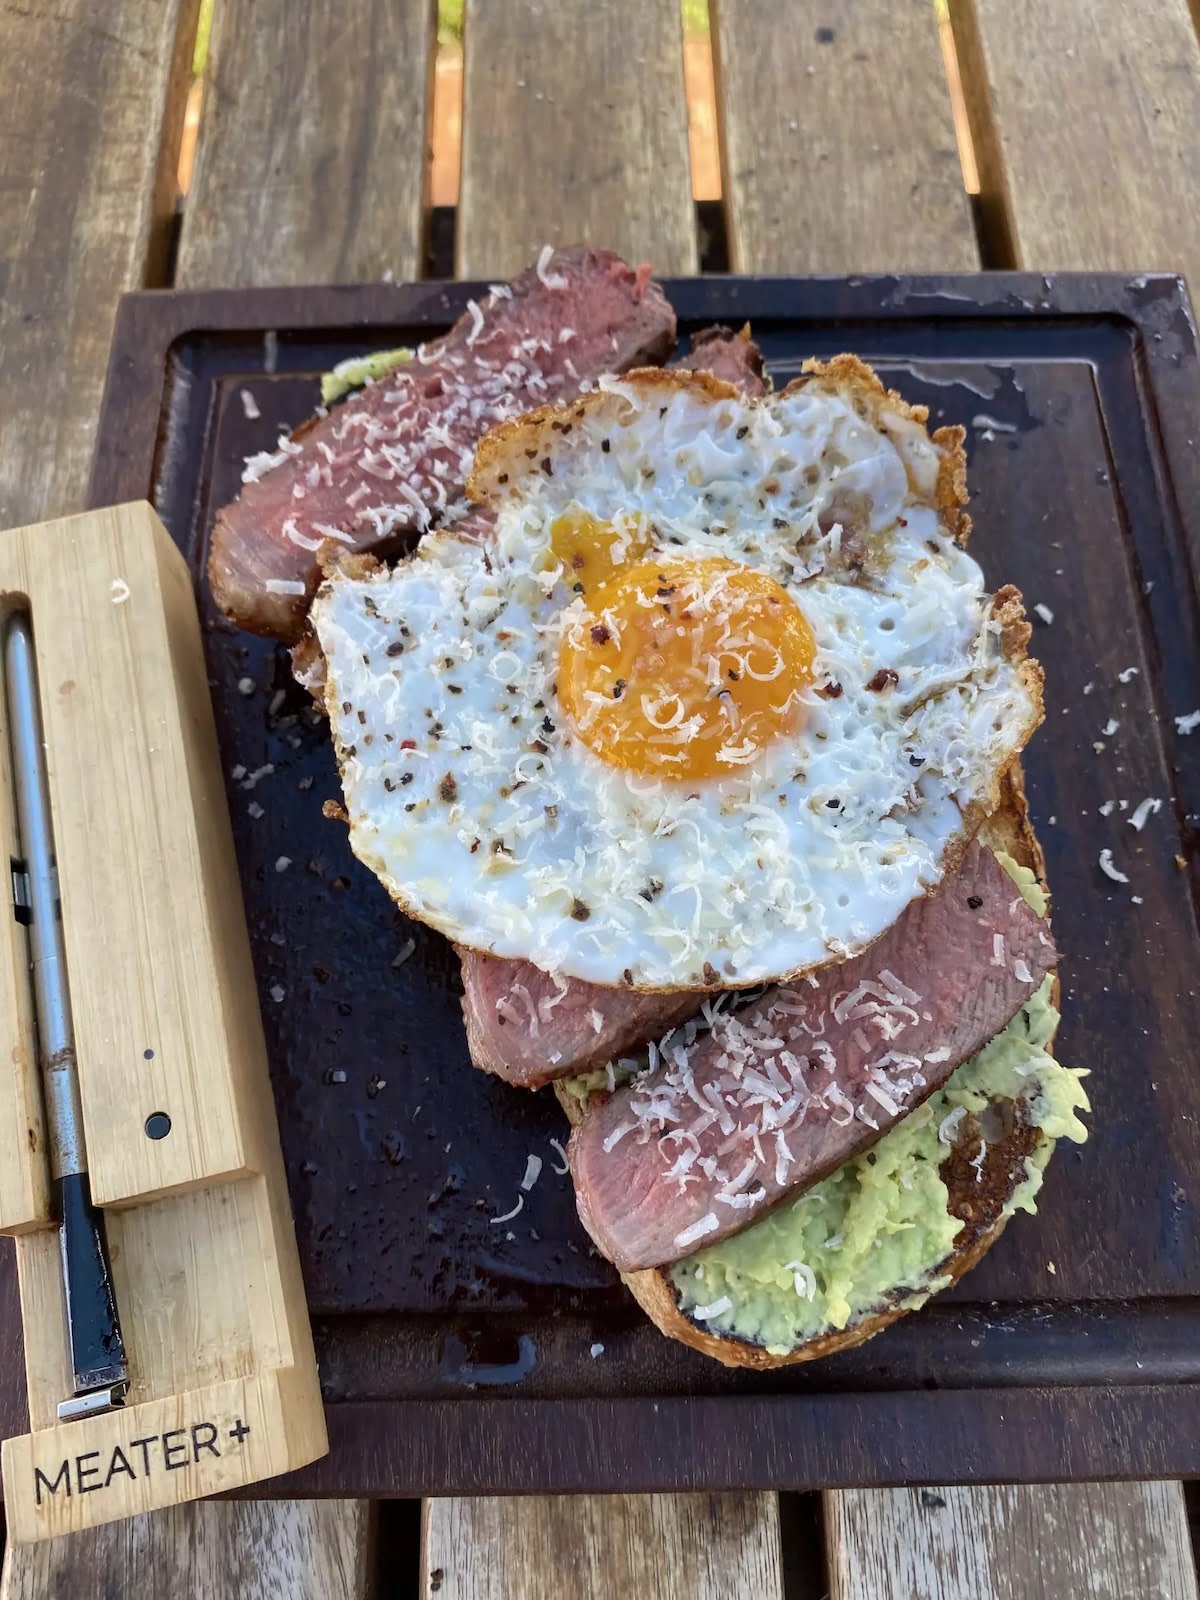 Grilled Steak & Eggs with Avocado